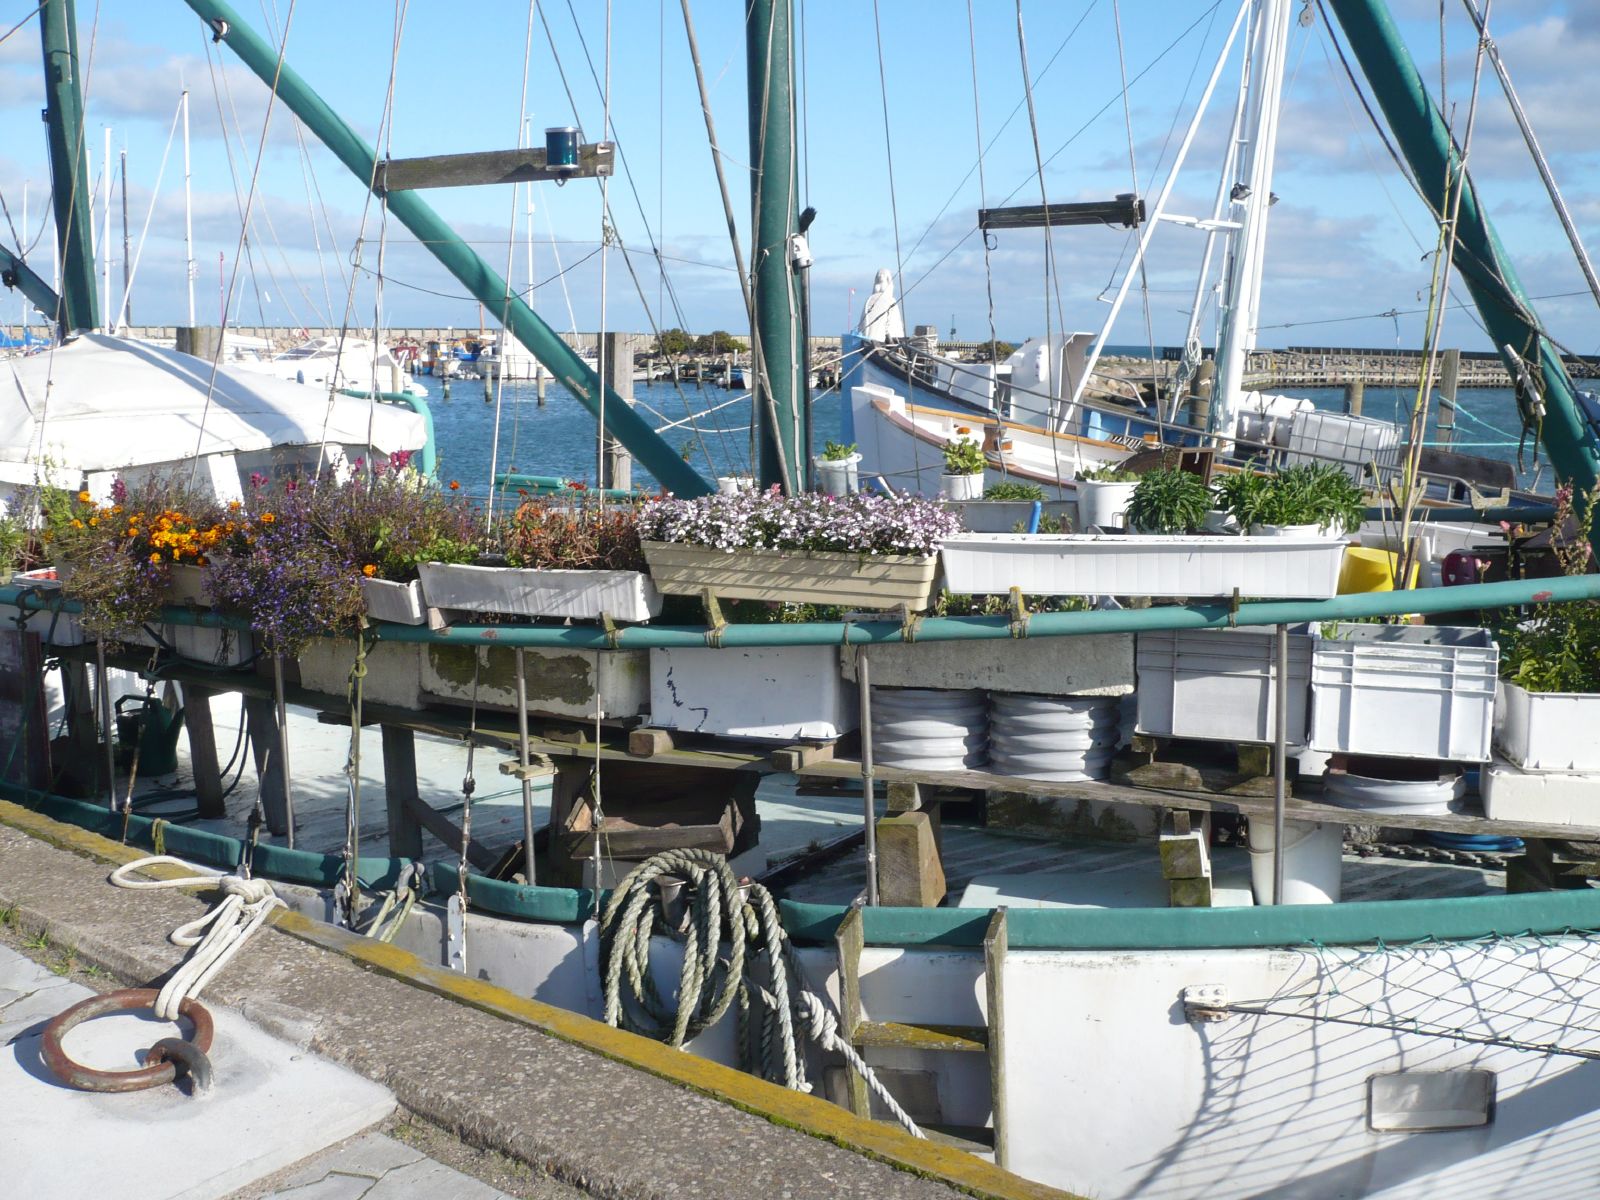 boats are docked at a harbor with many plants growing on the sides